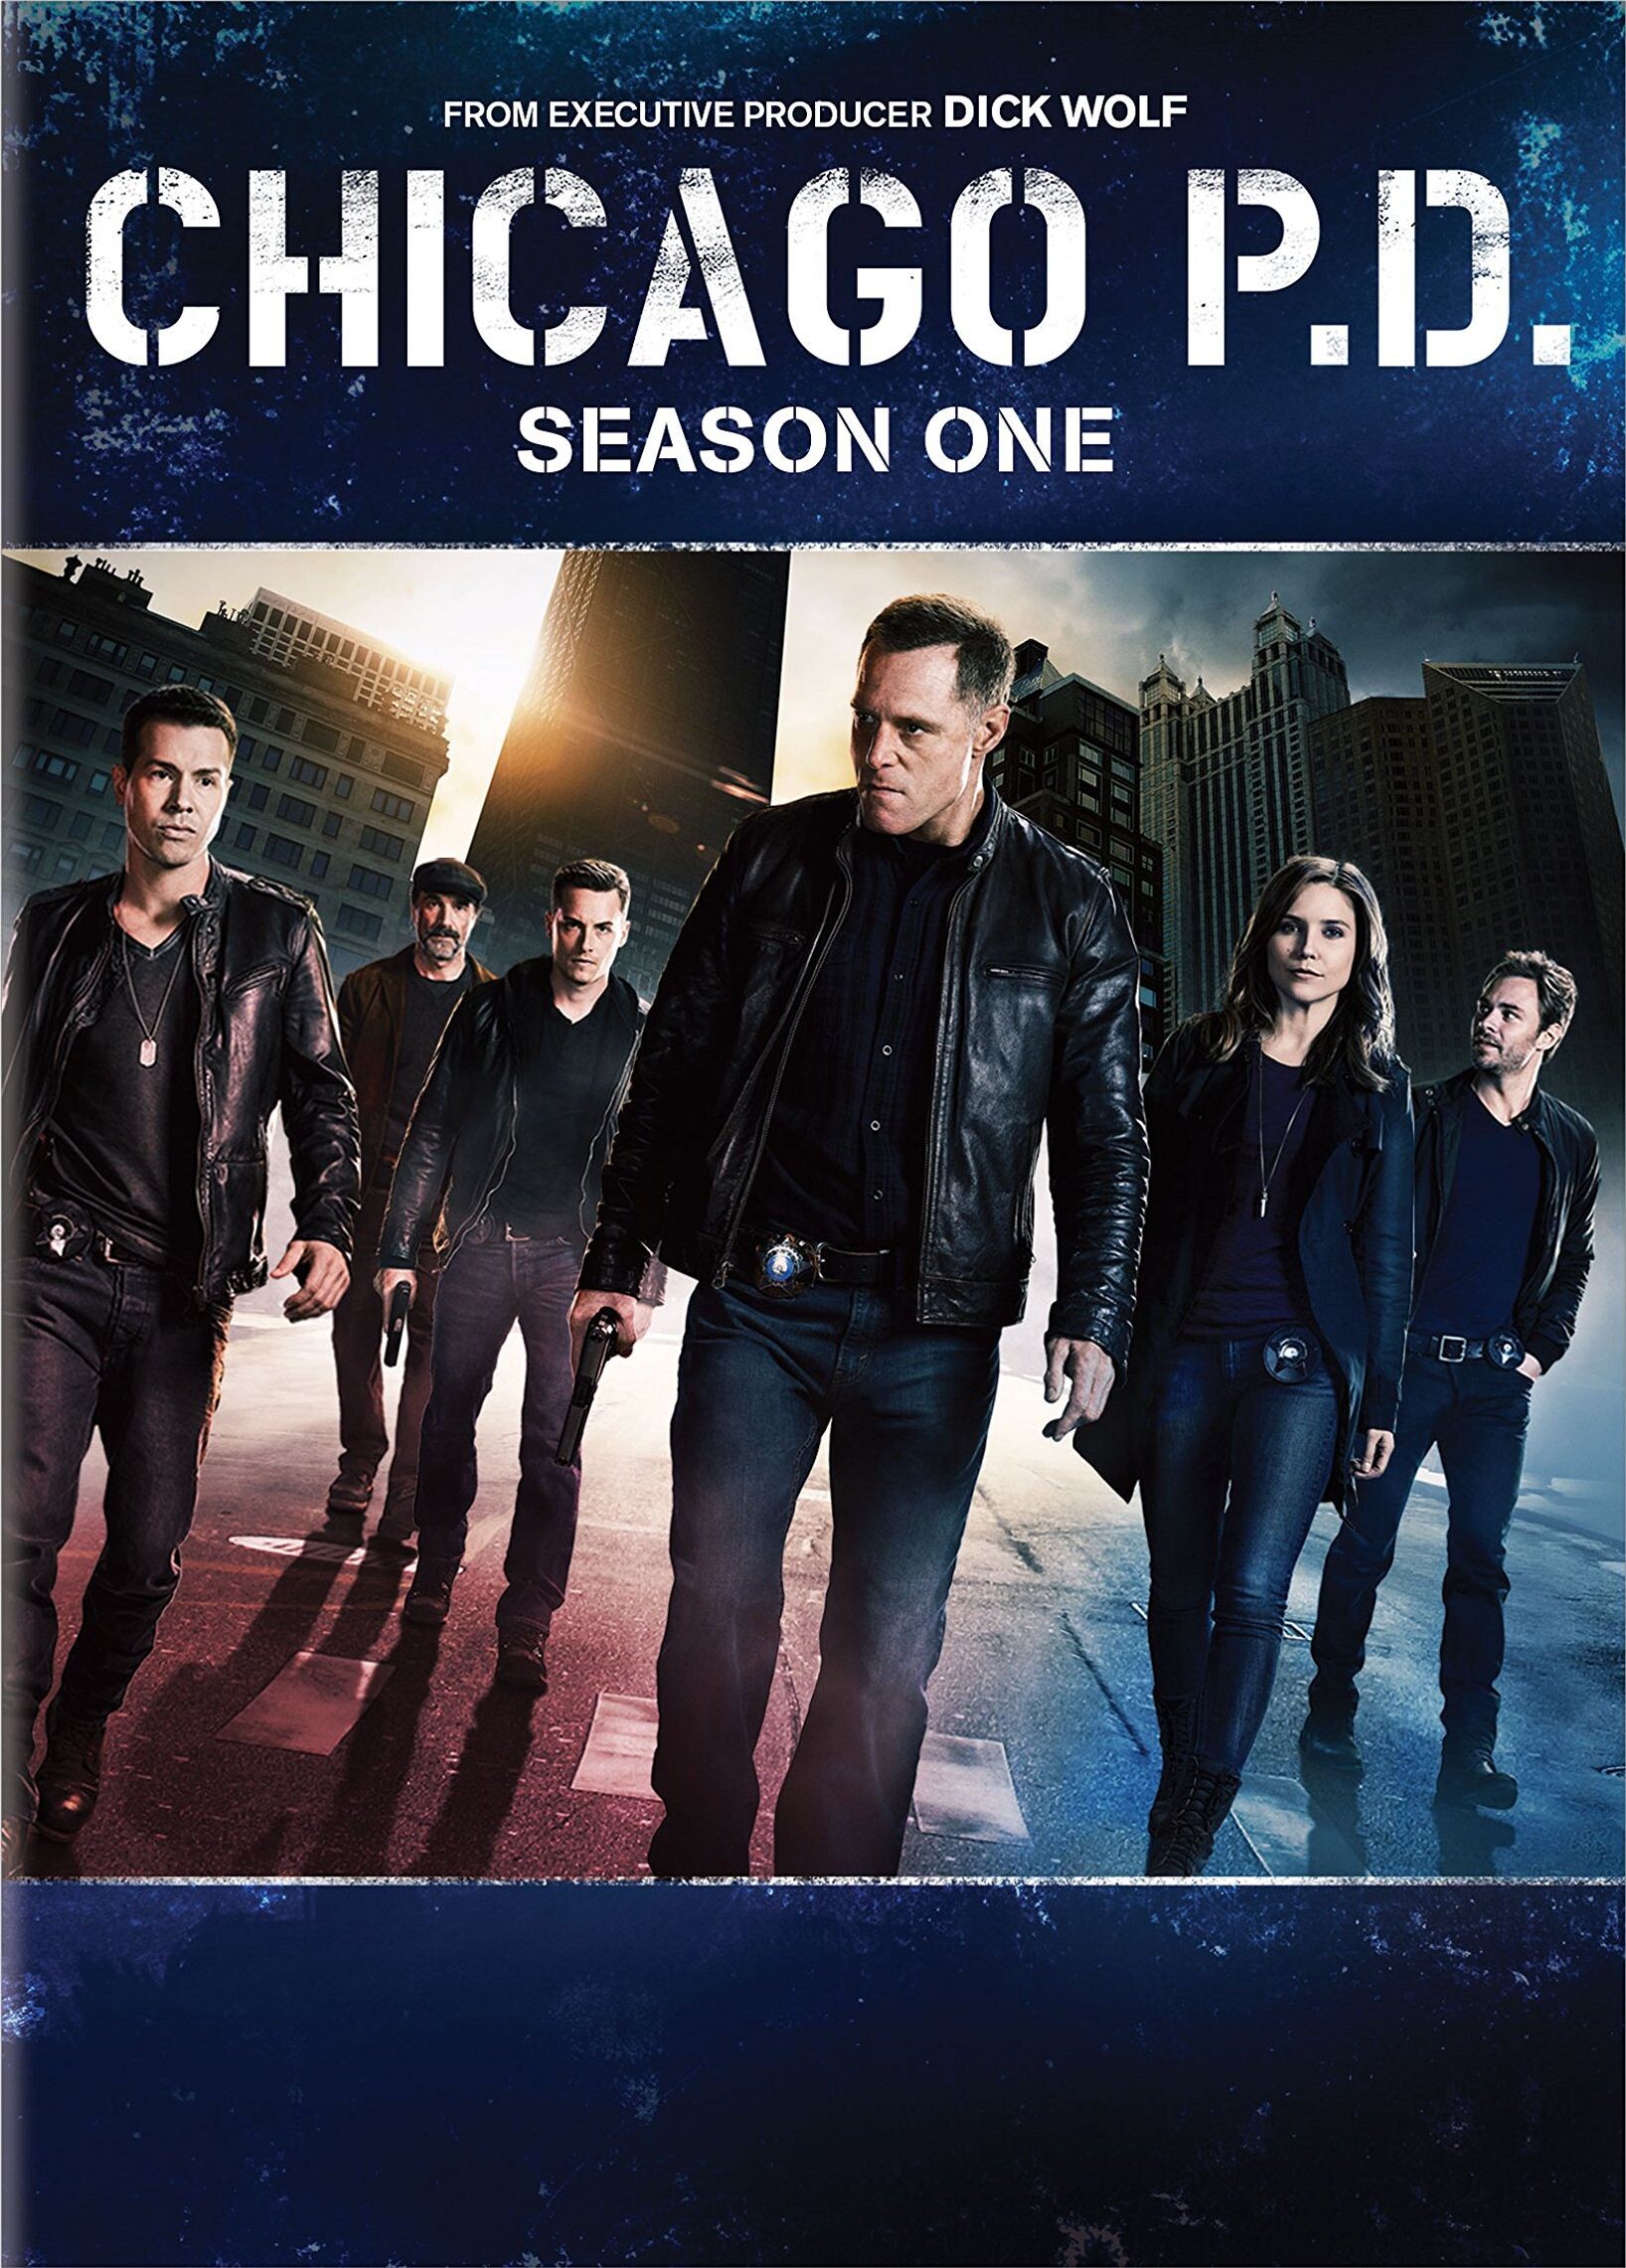 Chicago P.D. (TV Series): Crime Drama, Season 1, The Show Follows The Uniformed Patrol Officers Of The 21st District Of Chicago City. 1640x2290 HD Background.